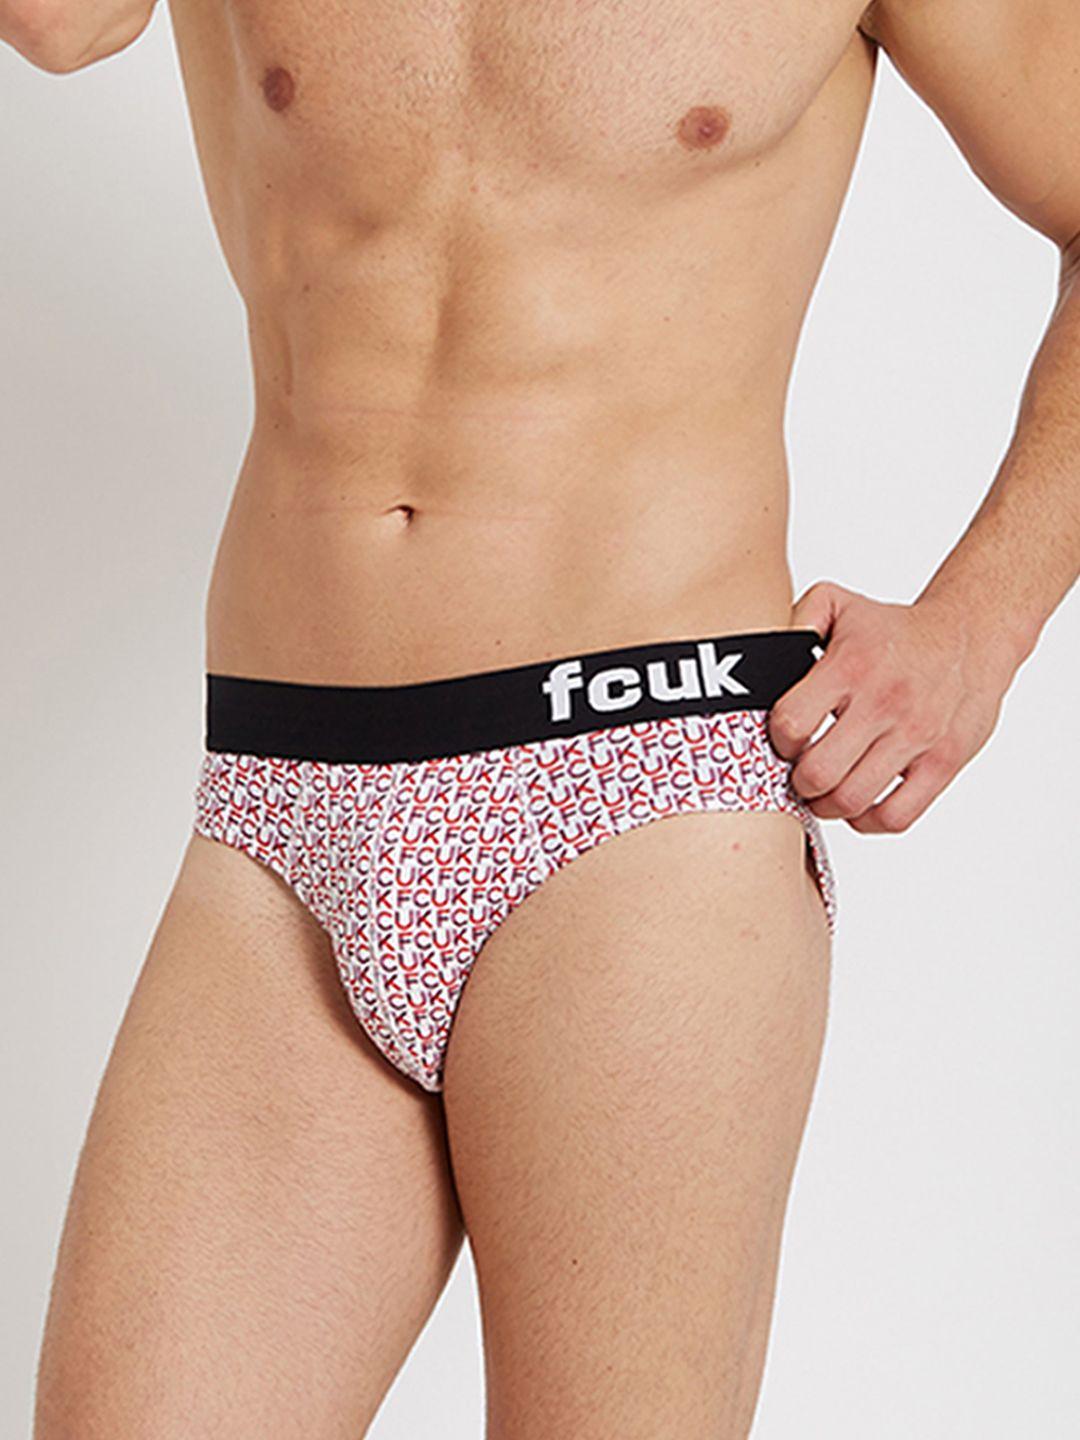 fcuk men off-white & pink printed rounded text repeat briefs m1aag